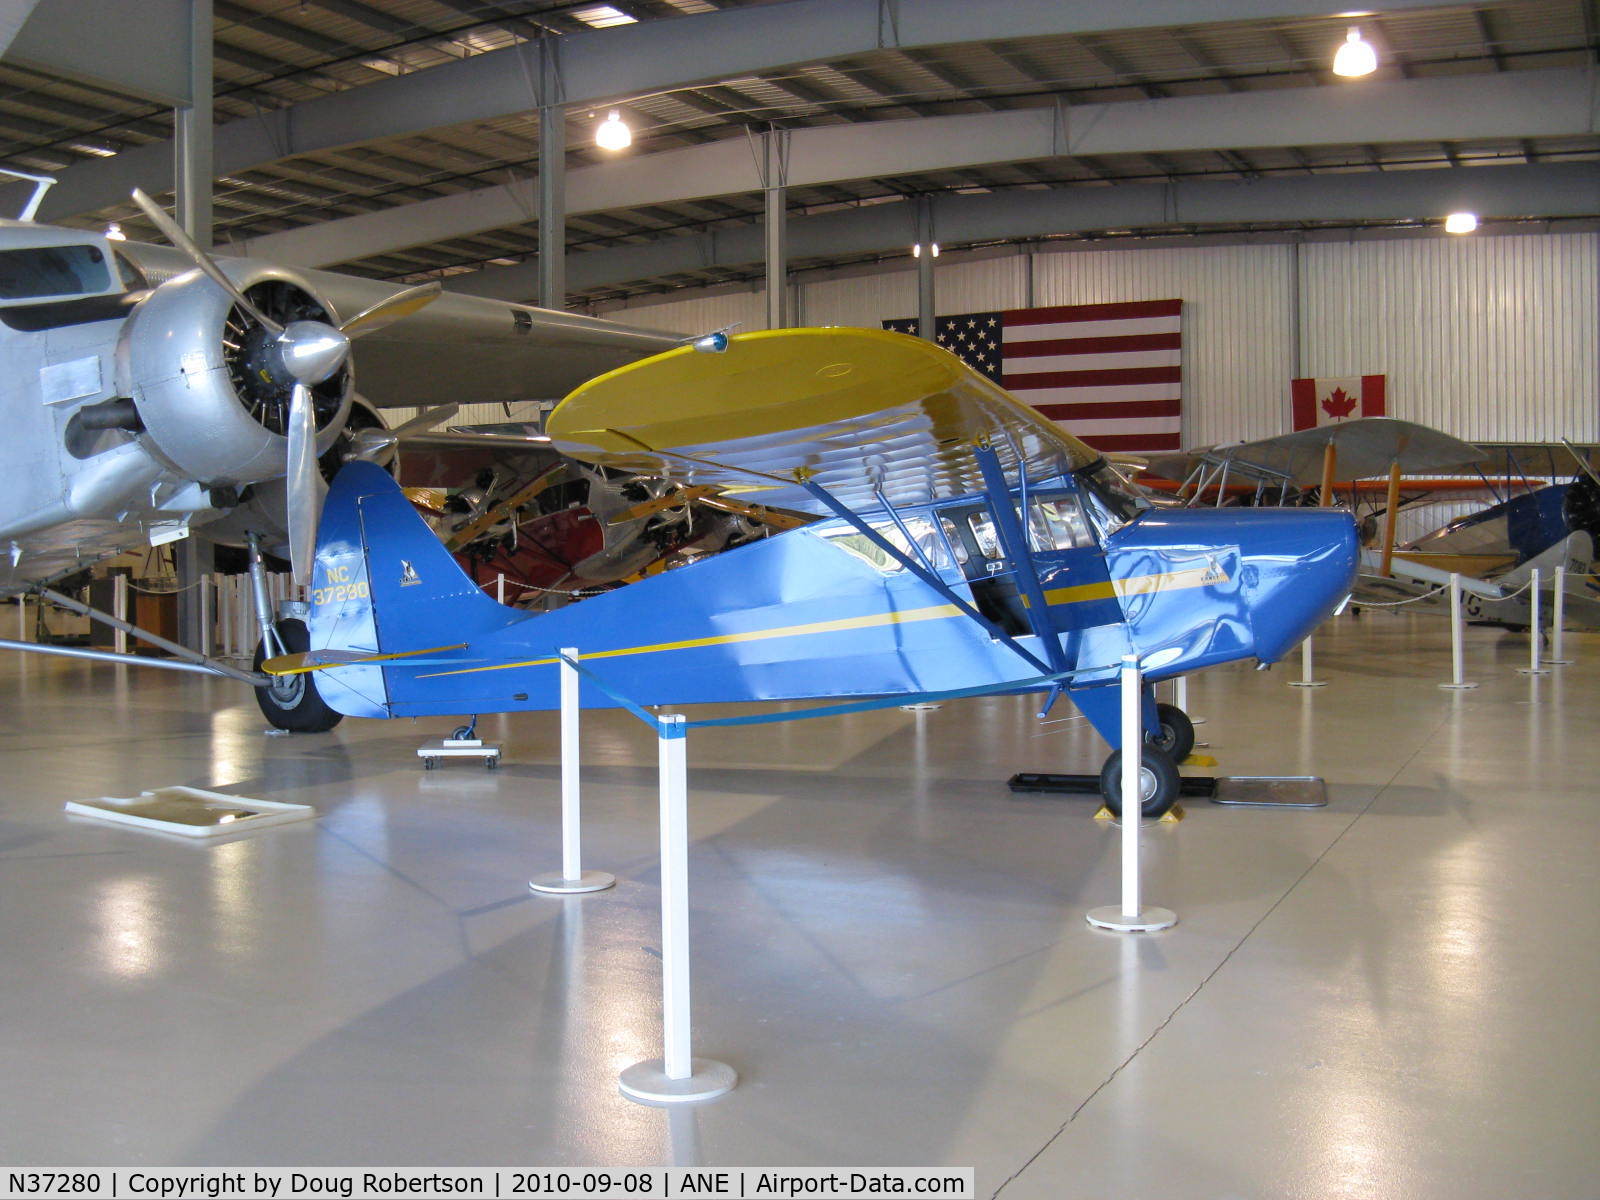 N37280, 1941 Interstate S-1A Cadet C/N 123, 1941 Interstate S-1A CADET, Franklin 4-AC-199-D2 85 Hp, at Golden Wings museum